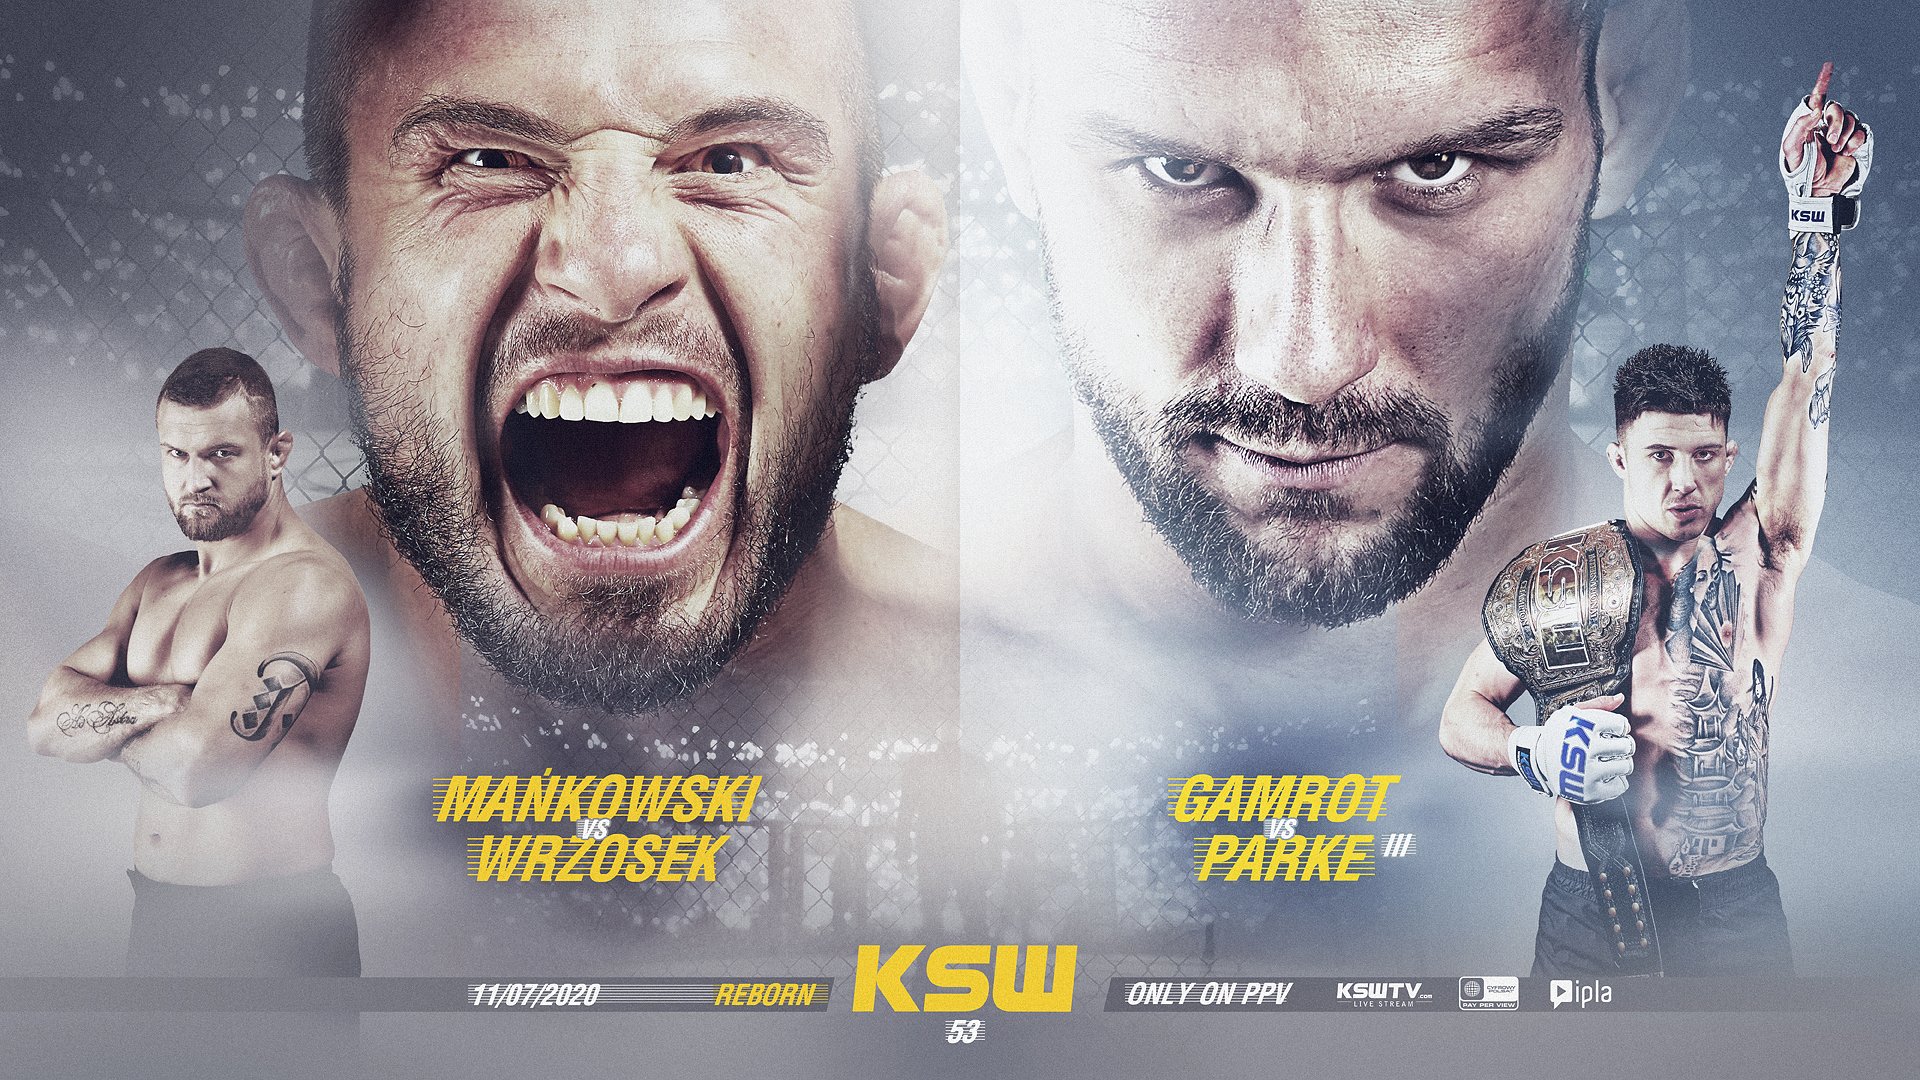 KSW announced that they will be holding KSW 53 behind closed doors on 11th July Gamrot Parke Mankowski Wrzosek